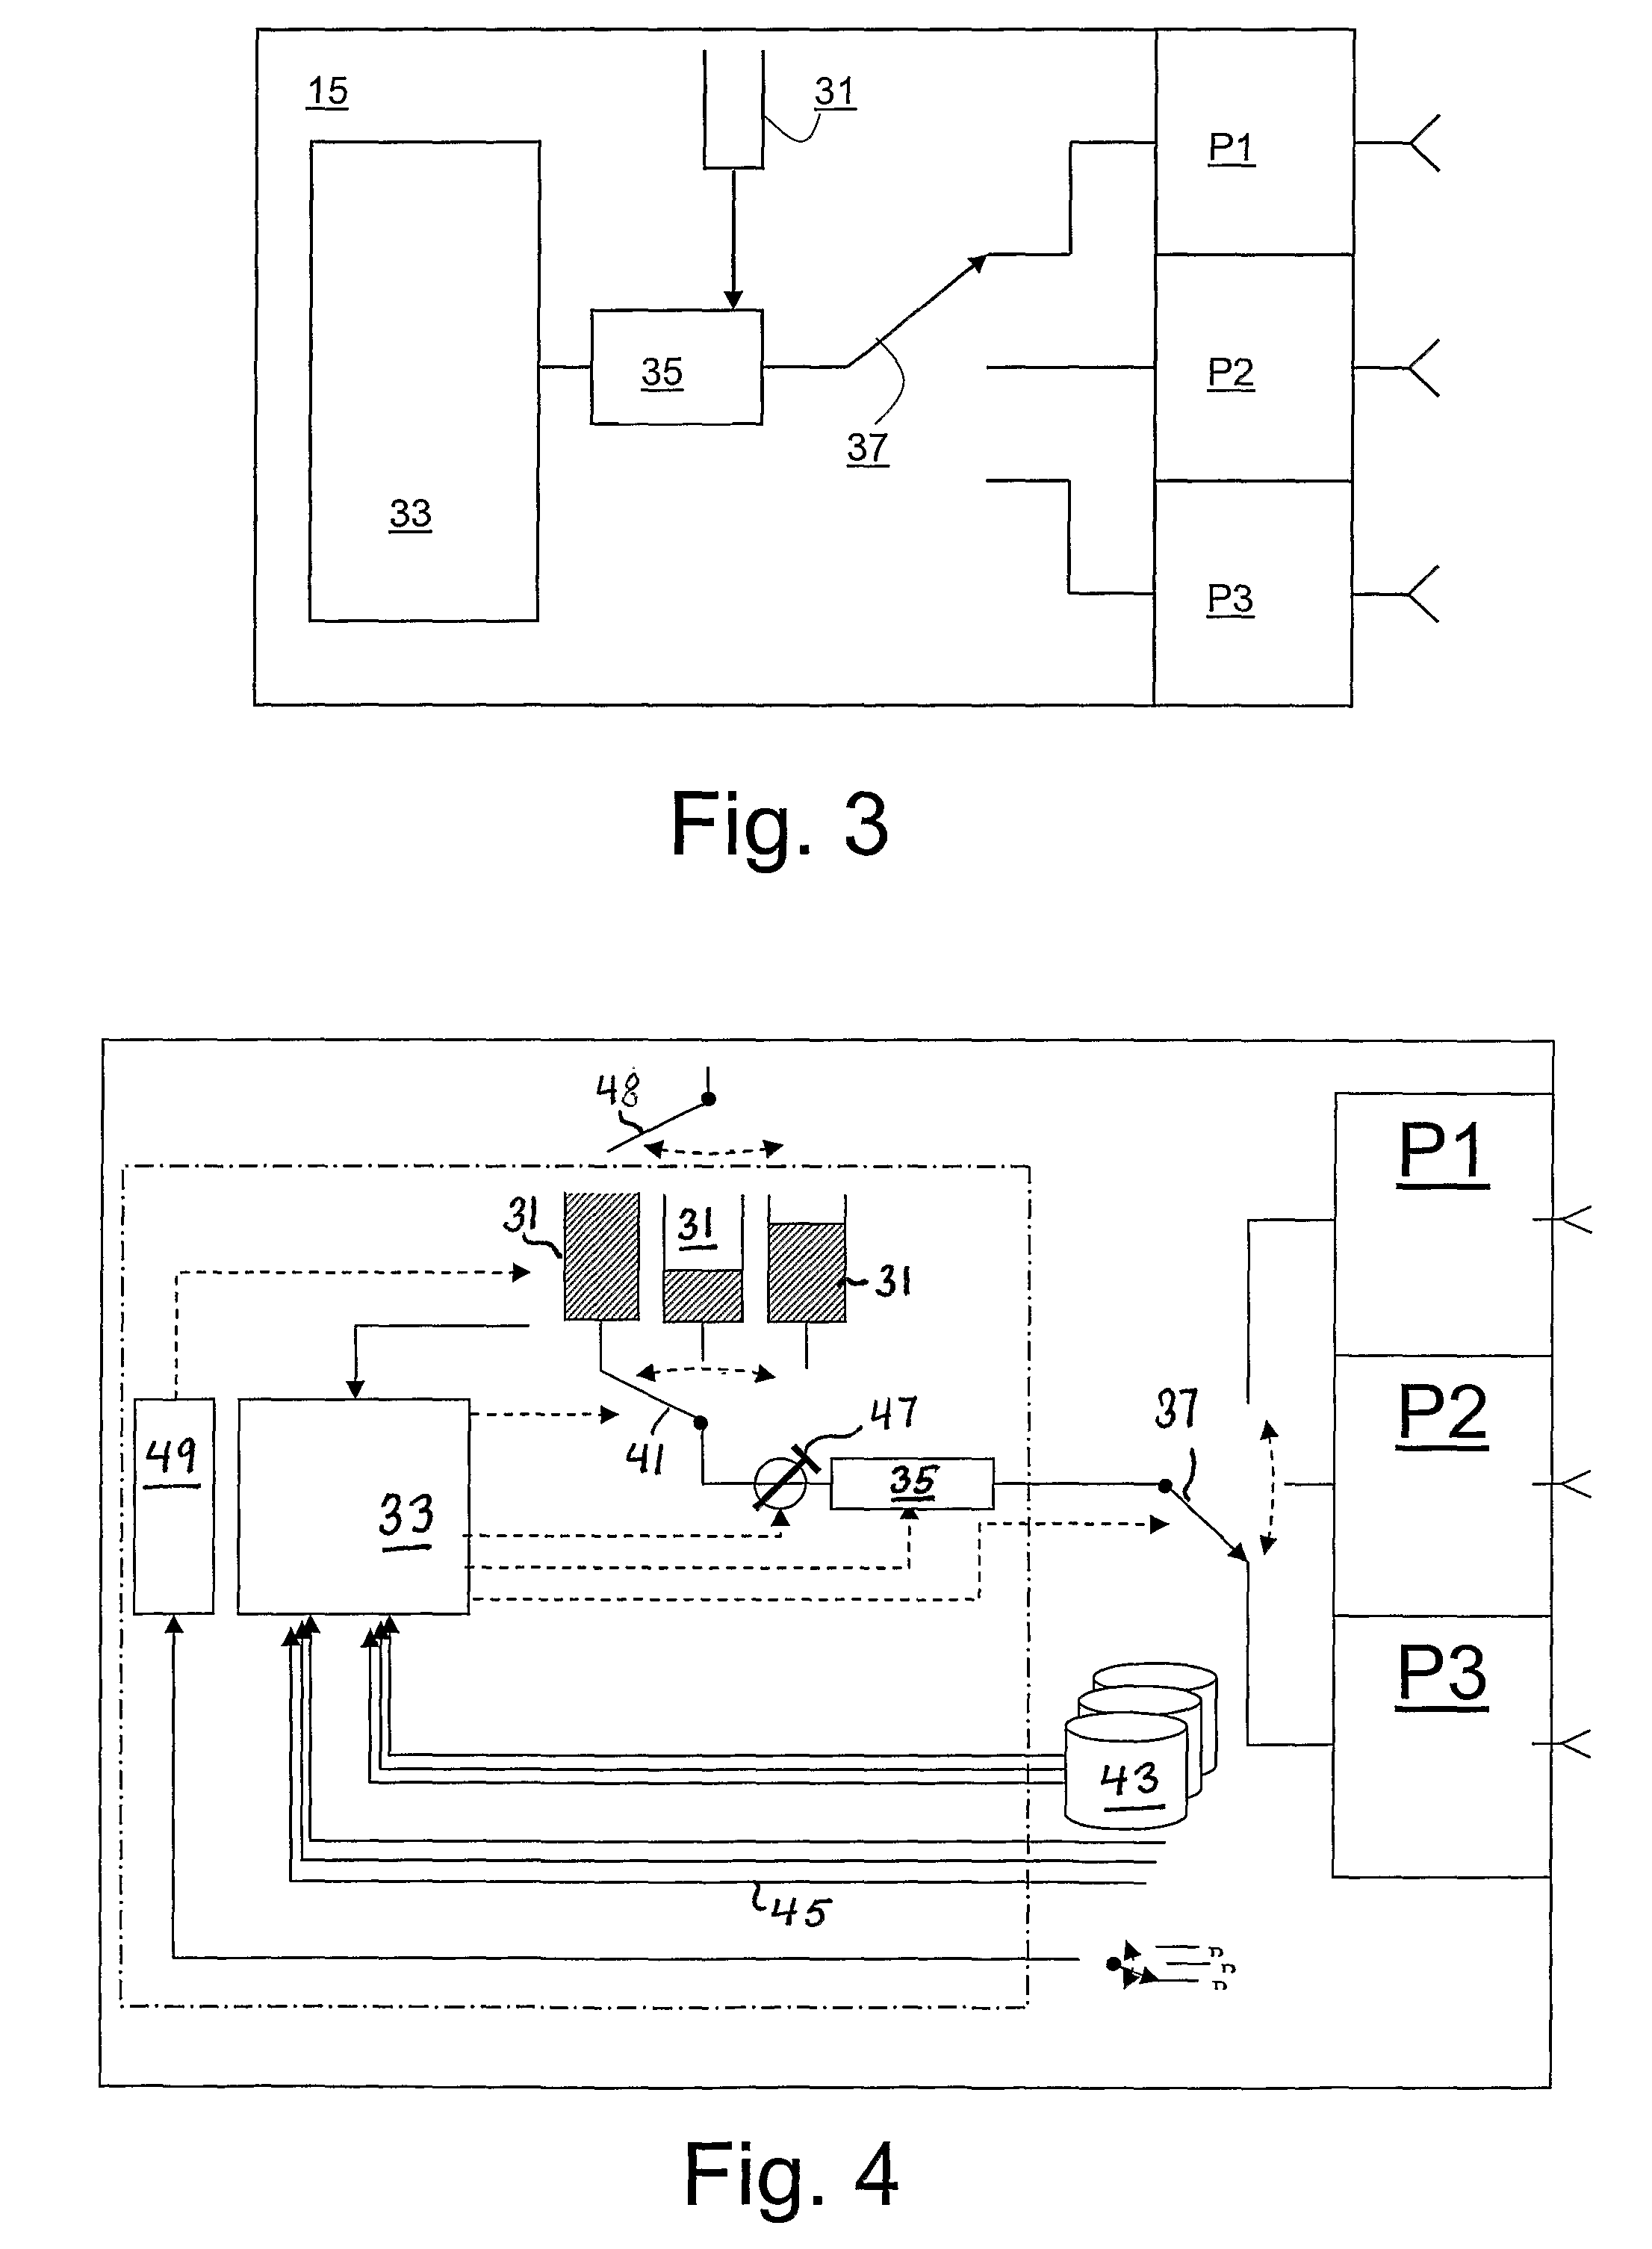 Method and apparatus for routing packets